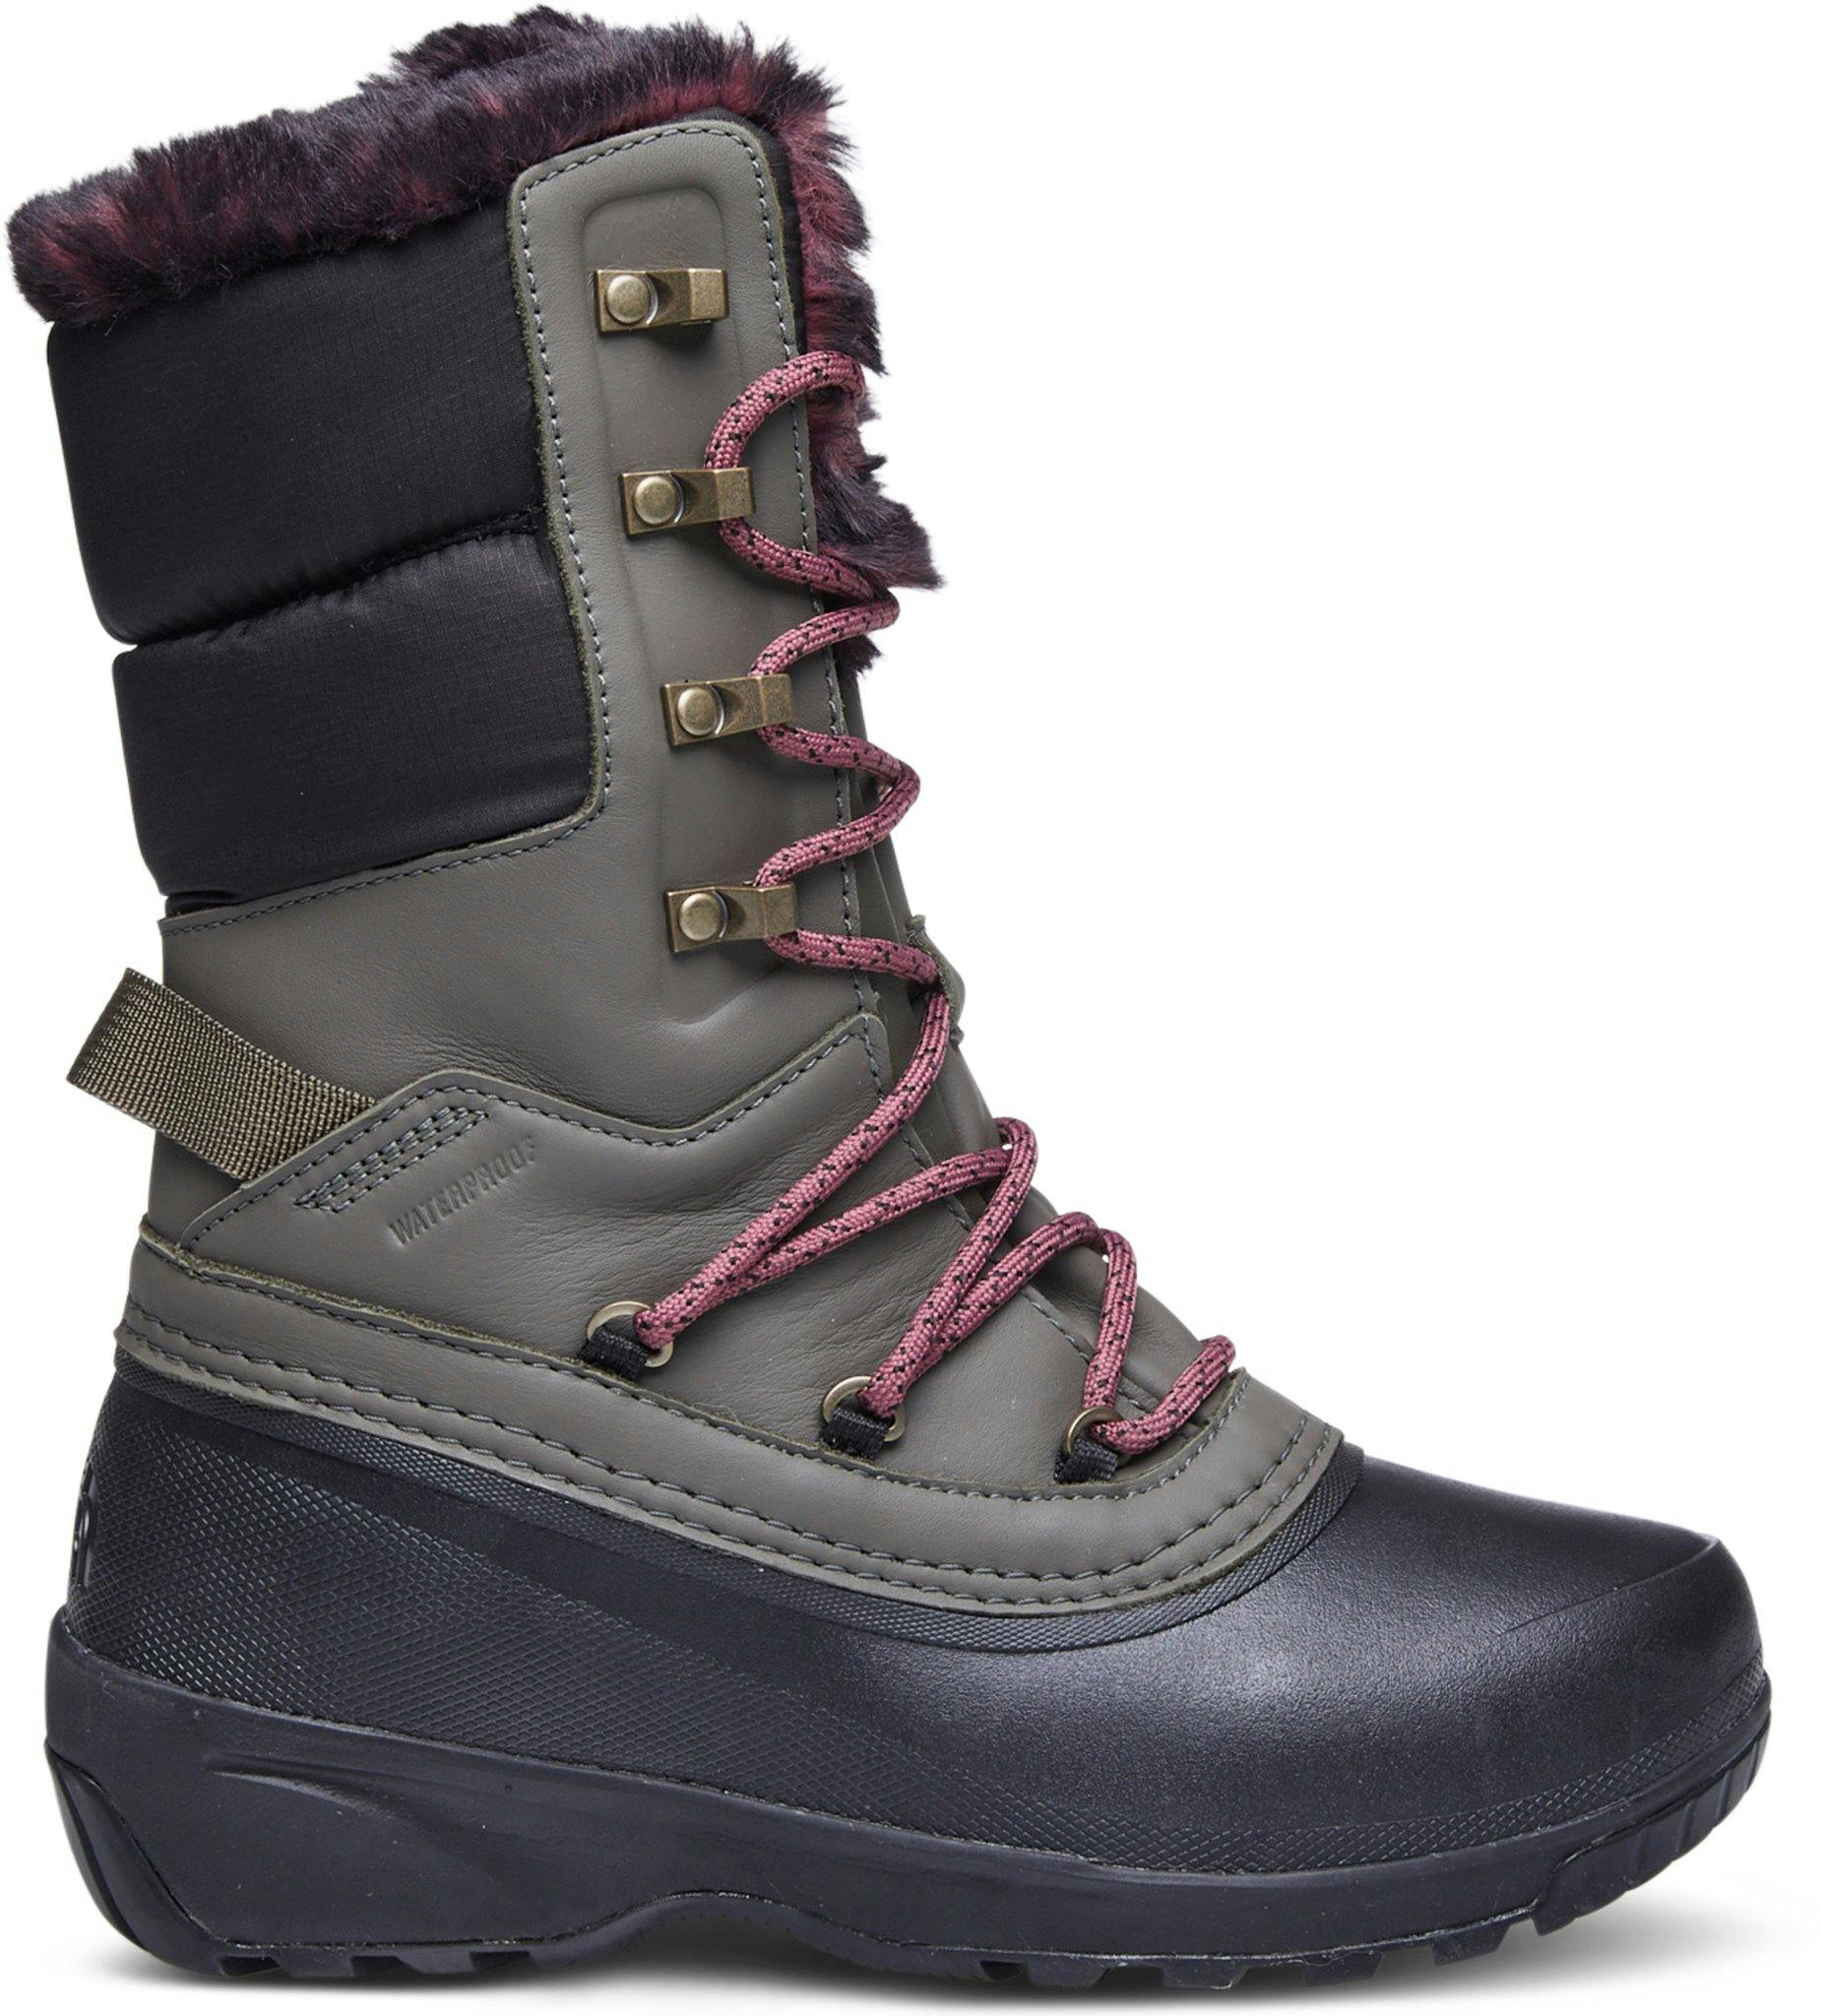 Product image for Shellista IV Luxe Waterproof Boots - Women’s